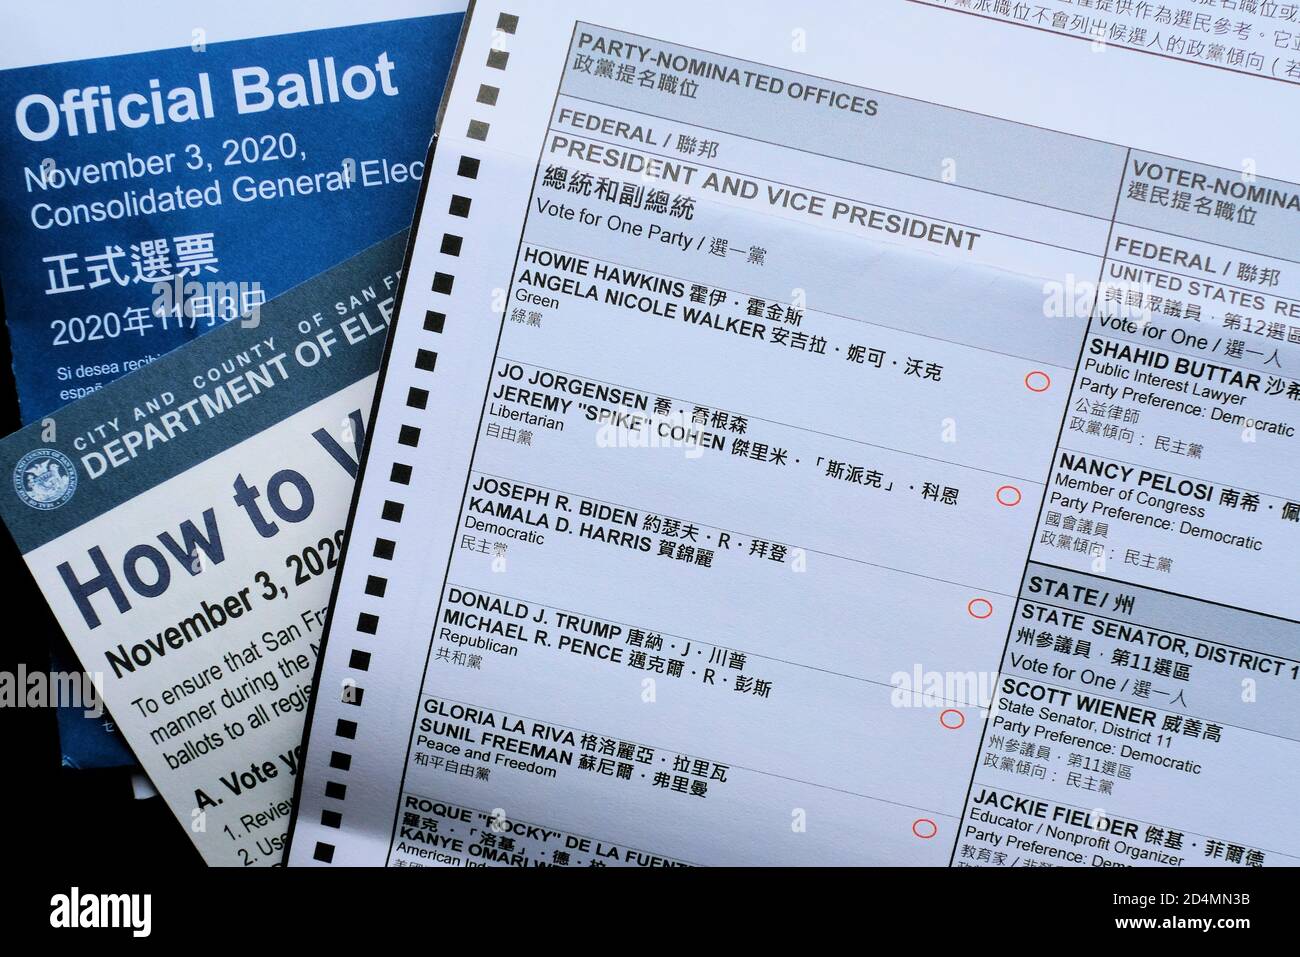 Official ballot for the November 3 2020 presidential election; with President and Vice President party nominated offices. Stock Photo